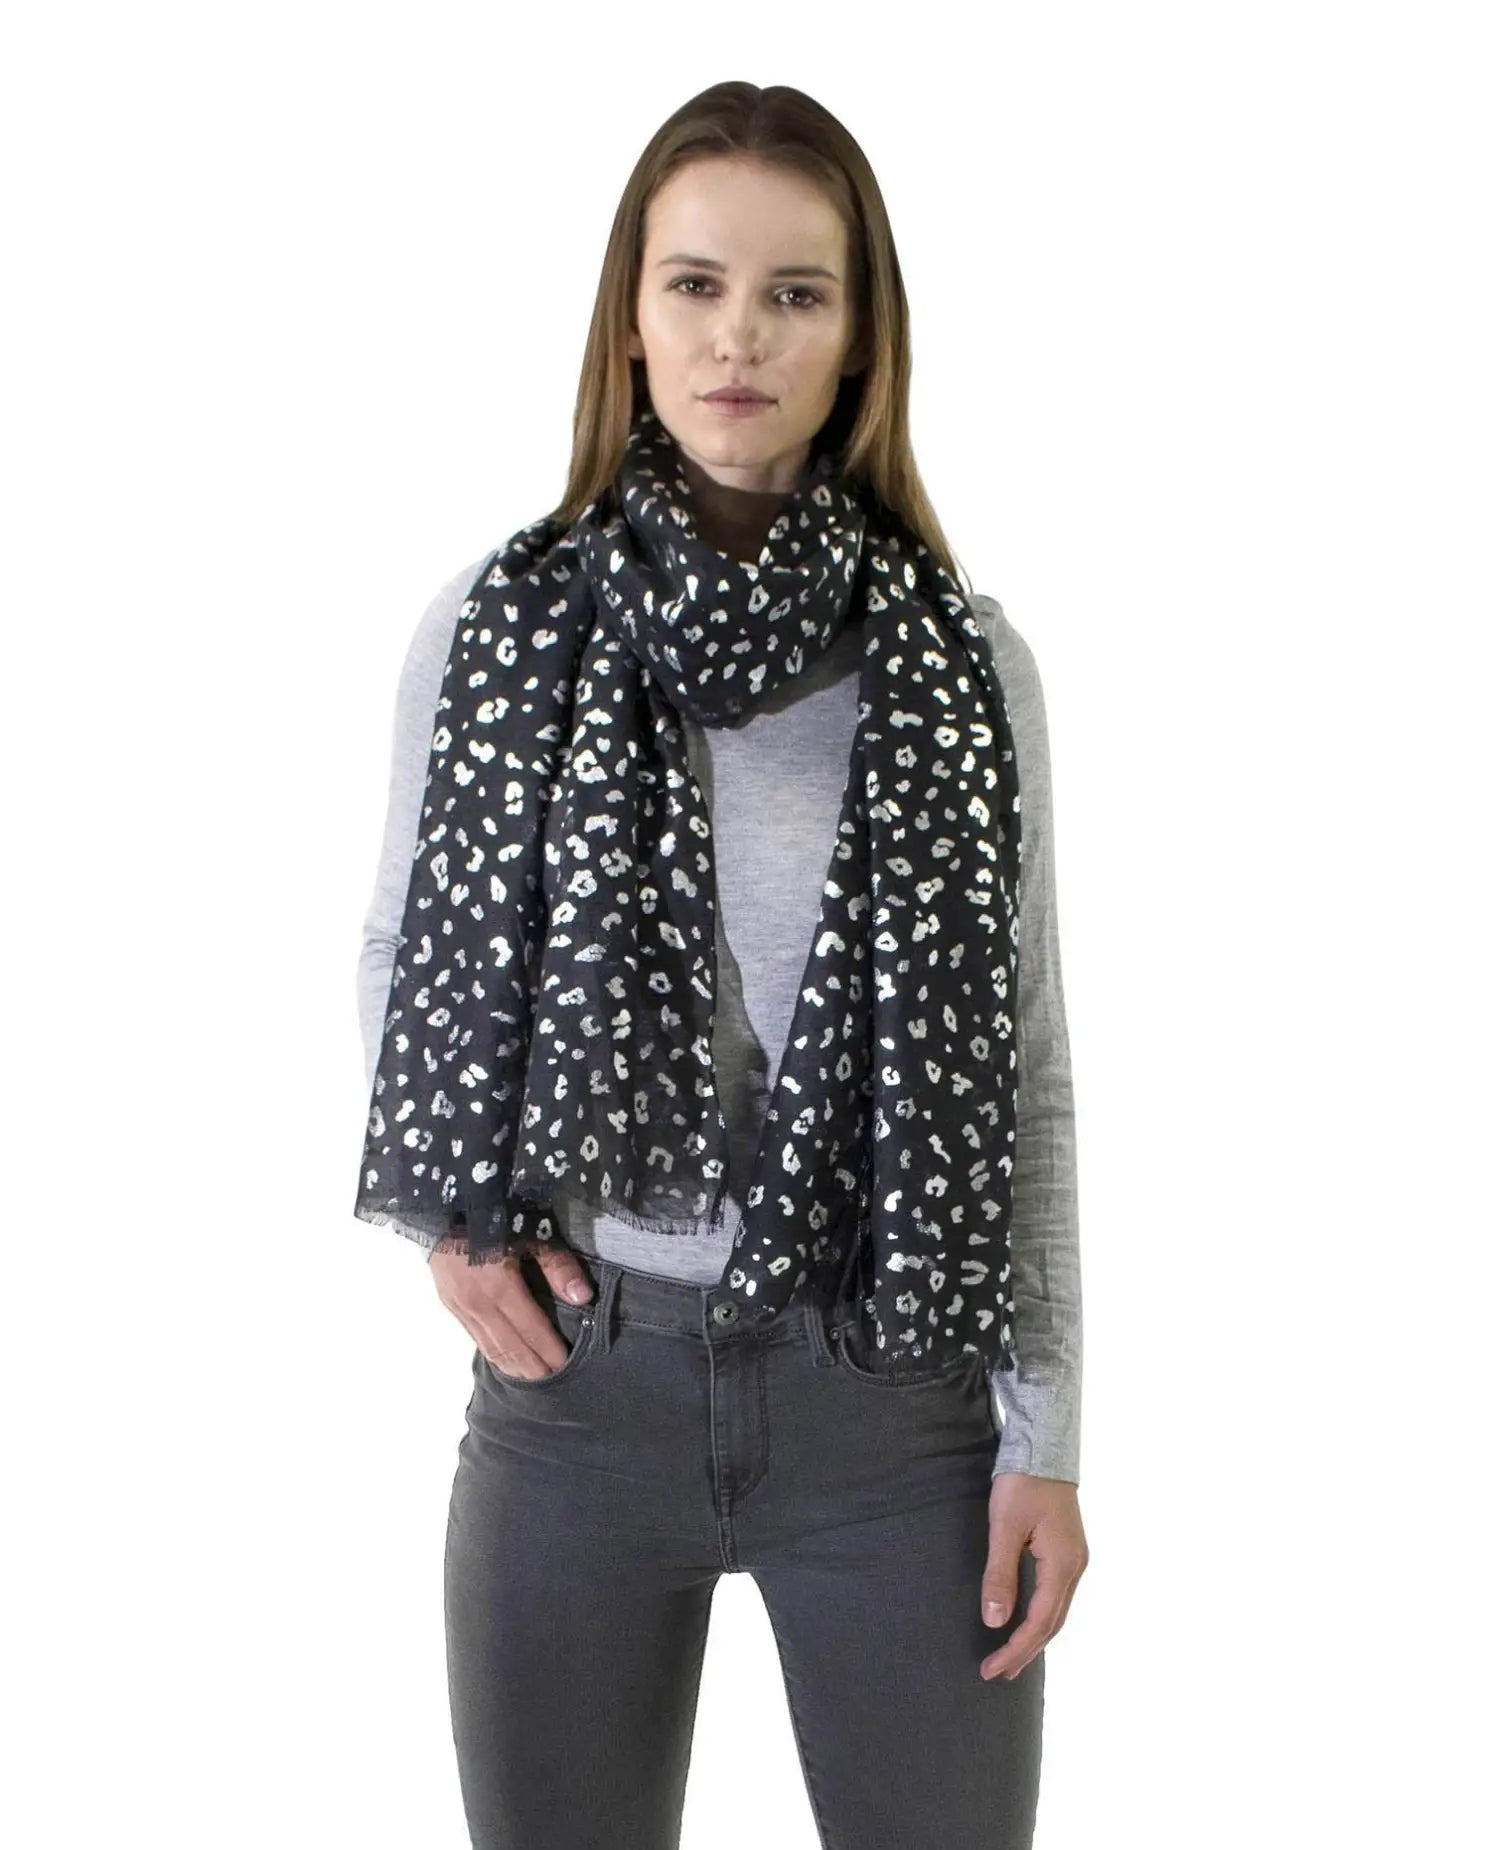 Stylish woman accessorizing with Silver Foil Leopard Print Large Scarf